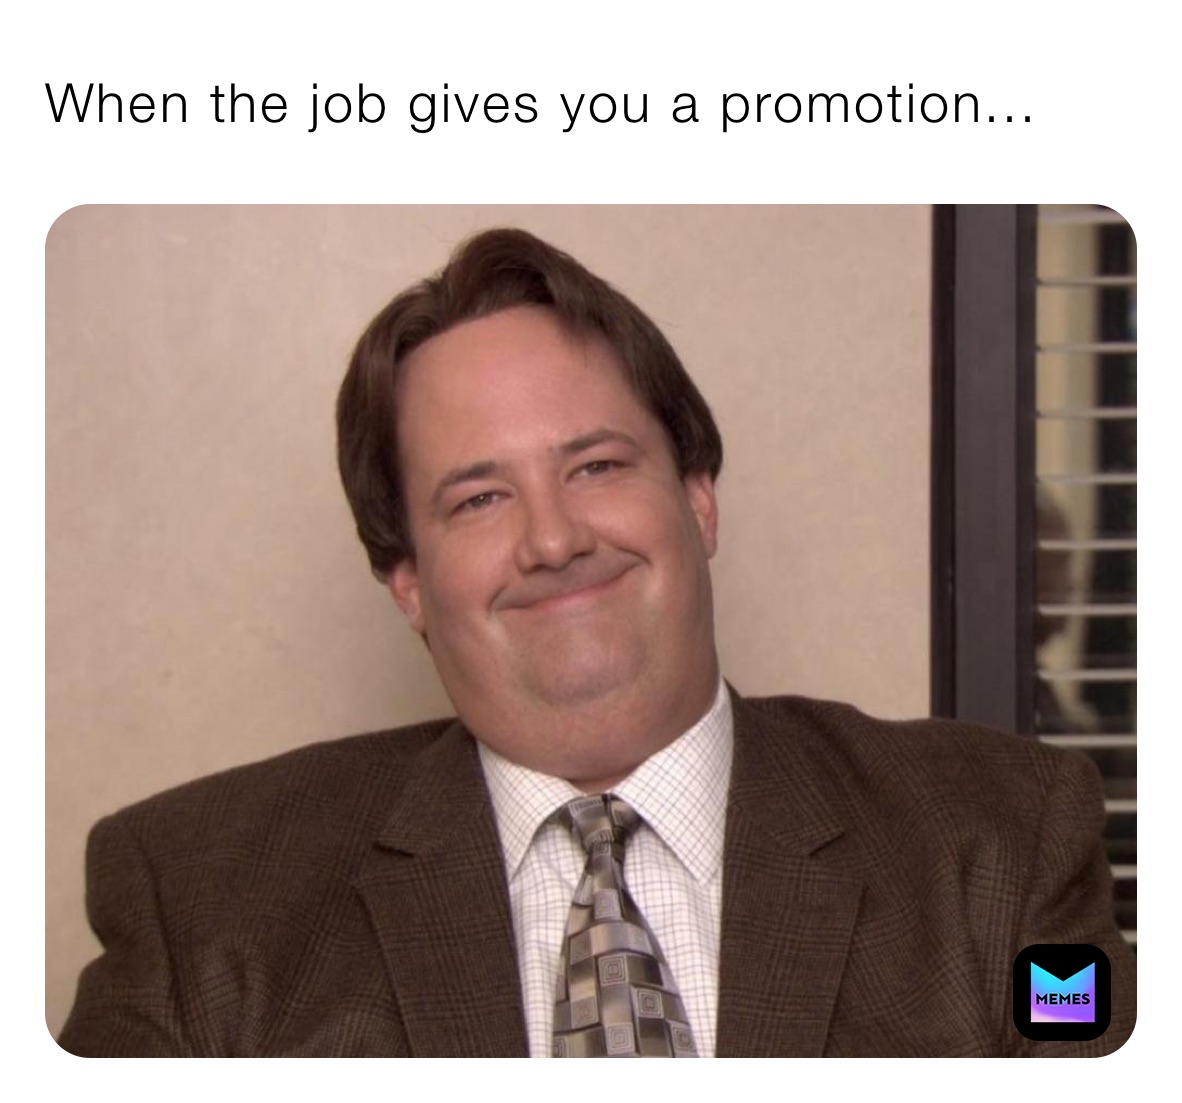 When the job gives you a promotion...